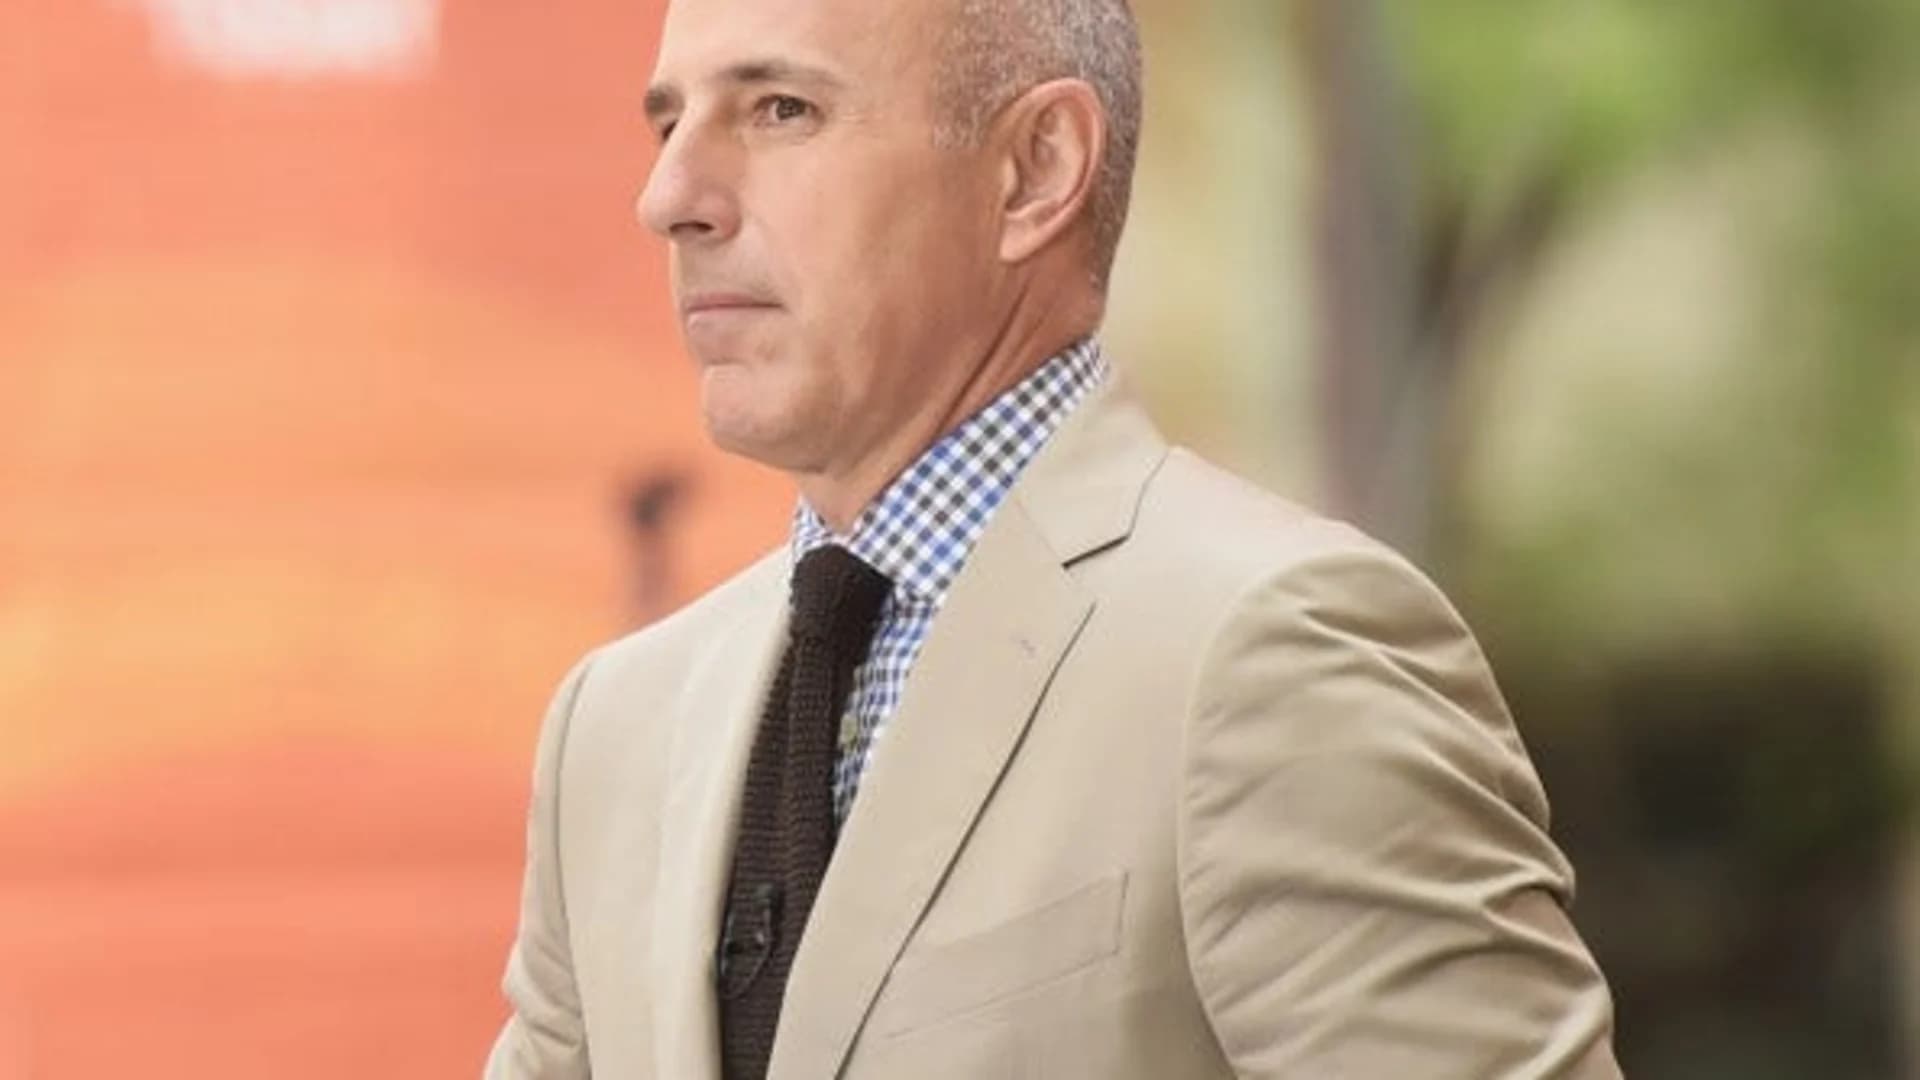 Statement released by fired 'Today' show host Matt Lauer